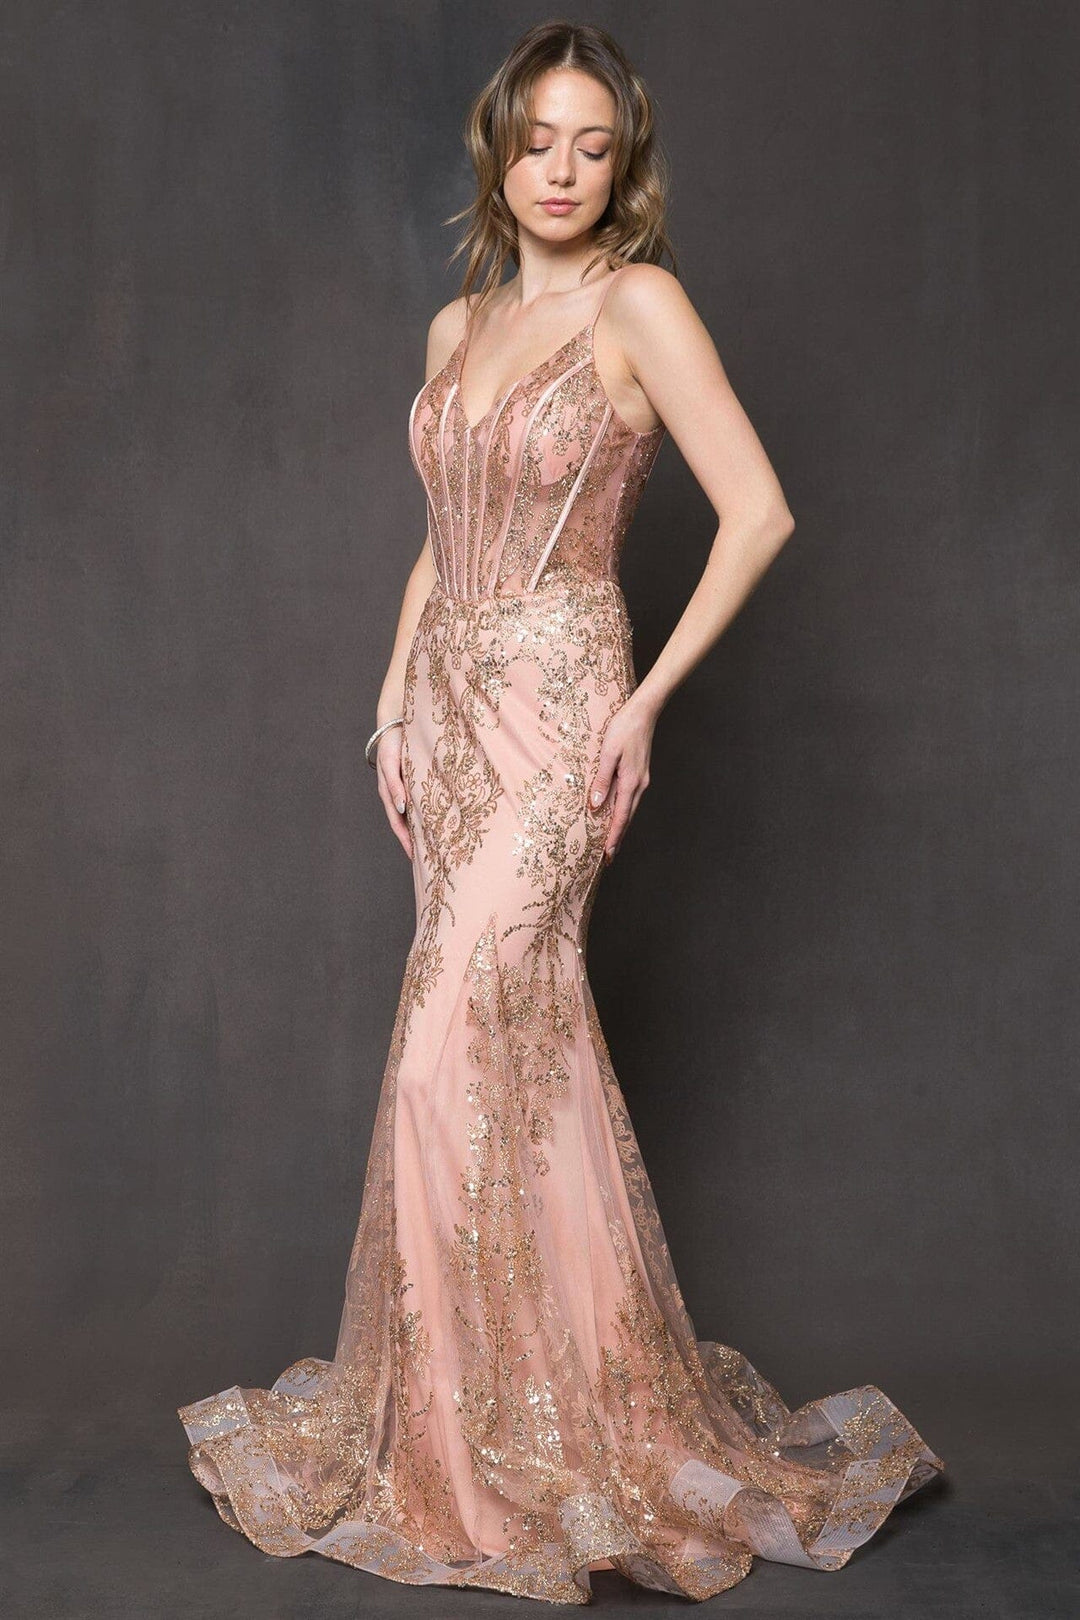 Glitter Print V-Neck Mermaid Gown by Amelia Couture BZ015